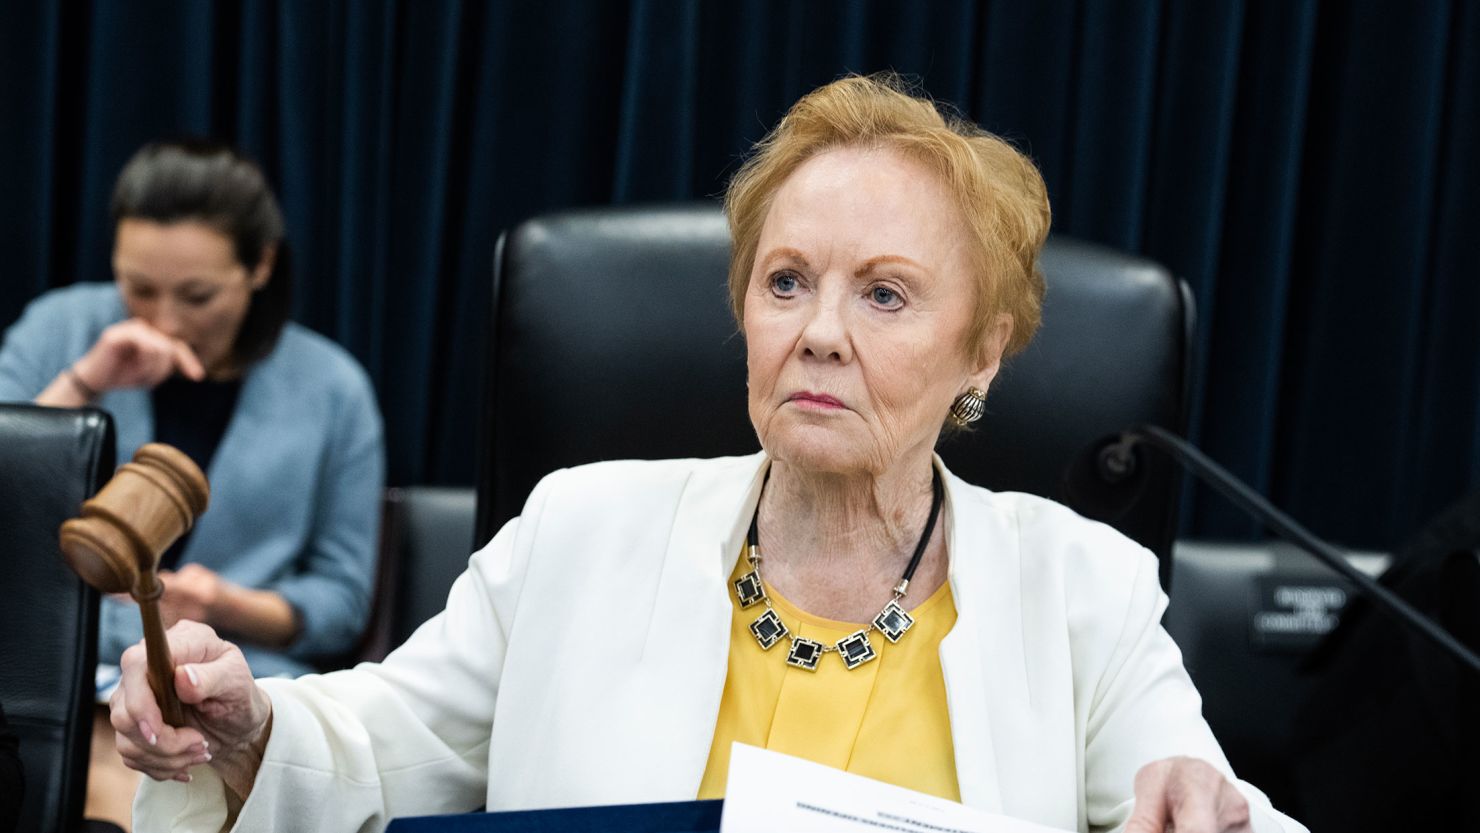 Chairwoman Kay Granger conducts the House Appropriations Committee markup of "Fiscal Year 2024 Transportation, Housing And Urban Development, And Related Agencies Bill," in Rayburn Building on Tuesday, July 18.